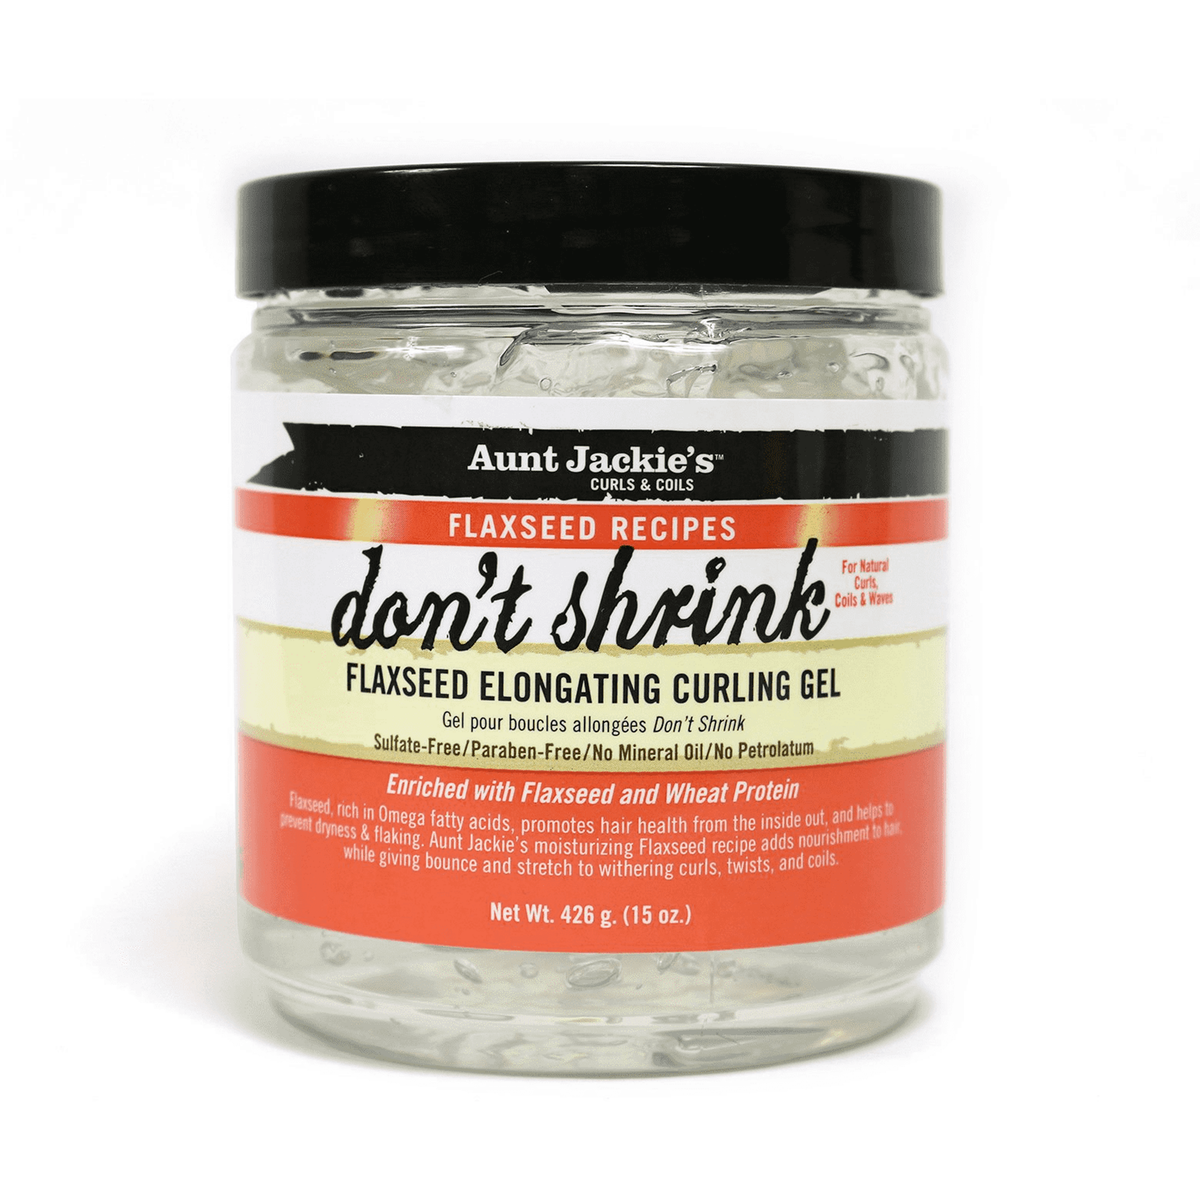 Aunt Jackie's Don't Shrink Flaxseed Elongating Curling Gel 15oz - AQ Online